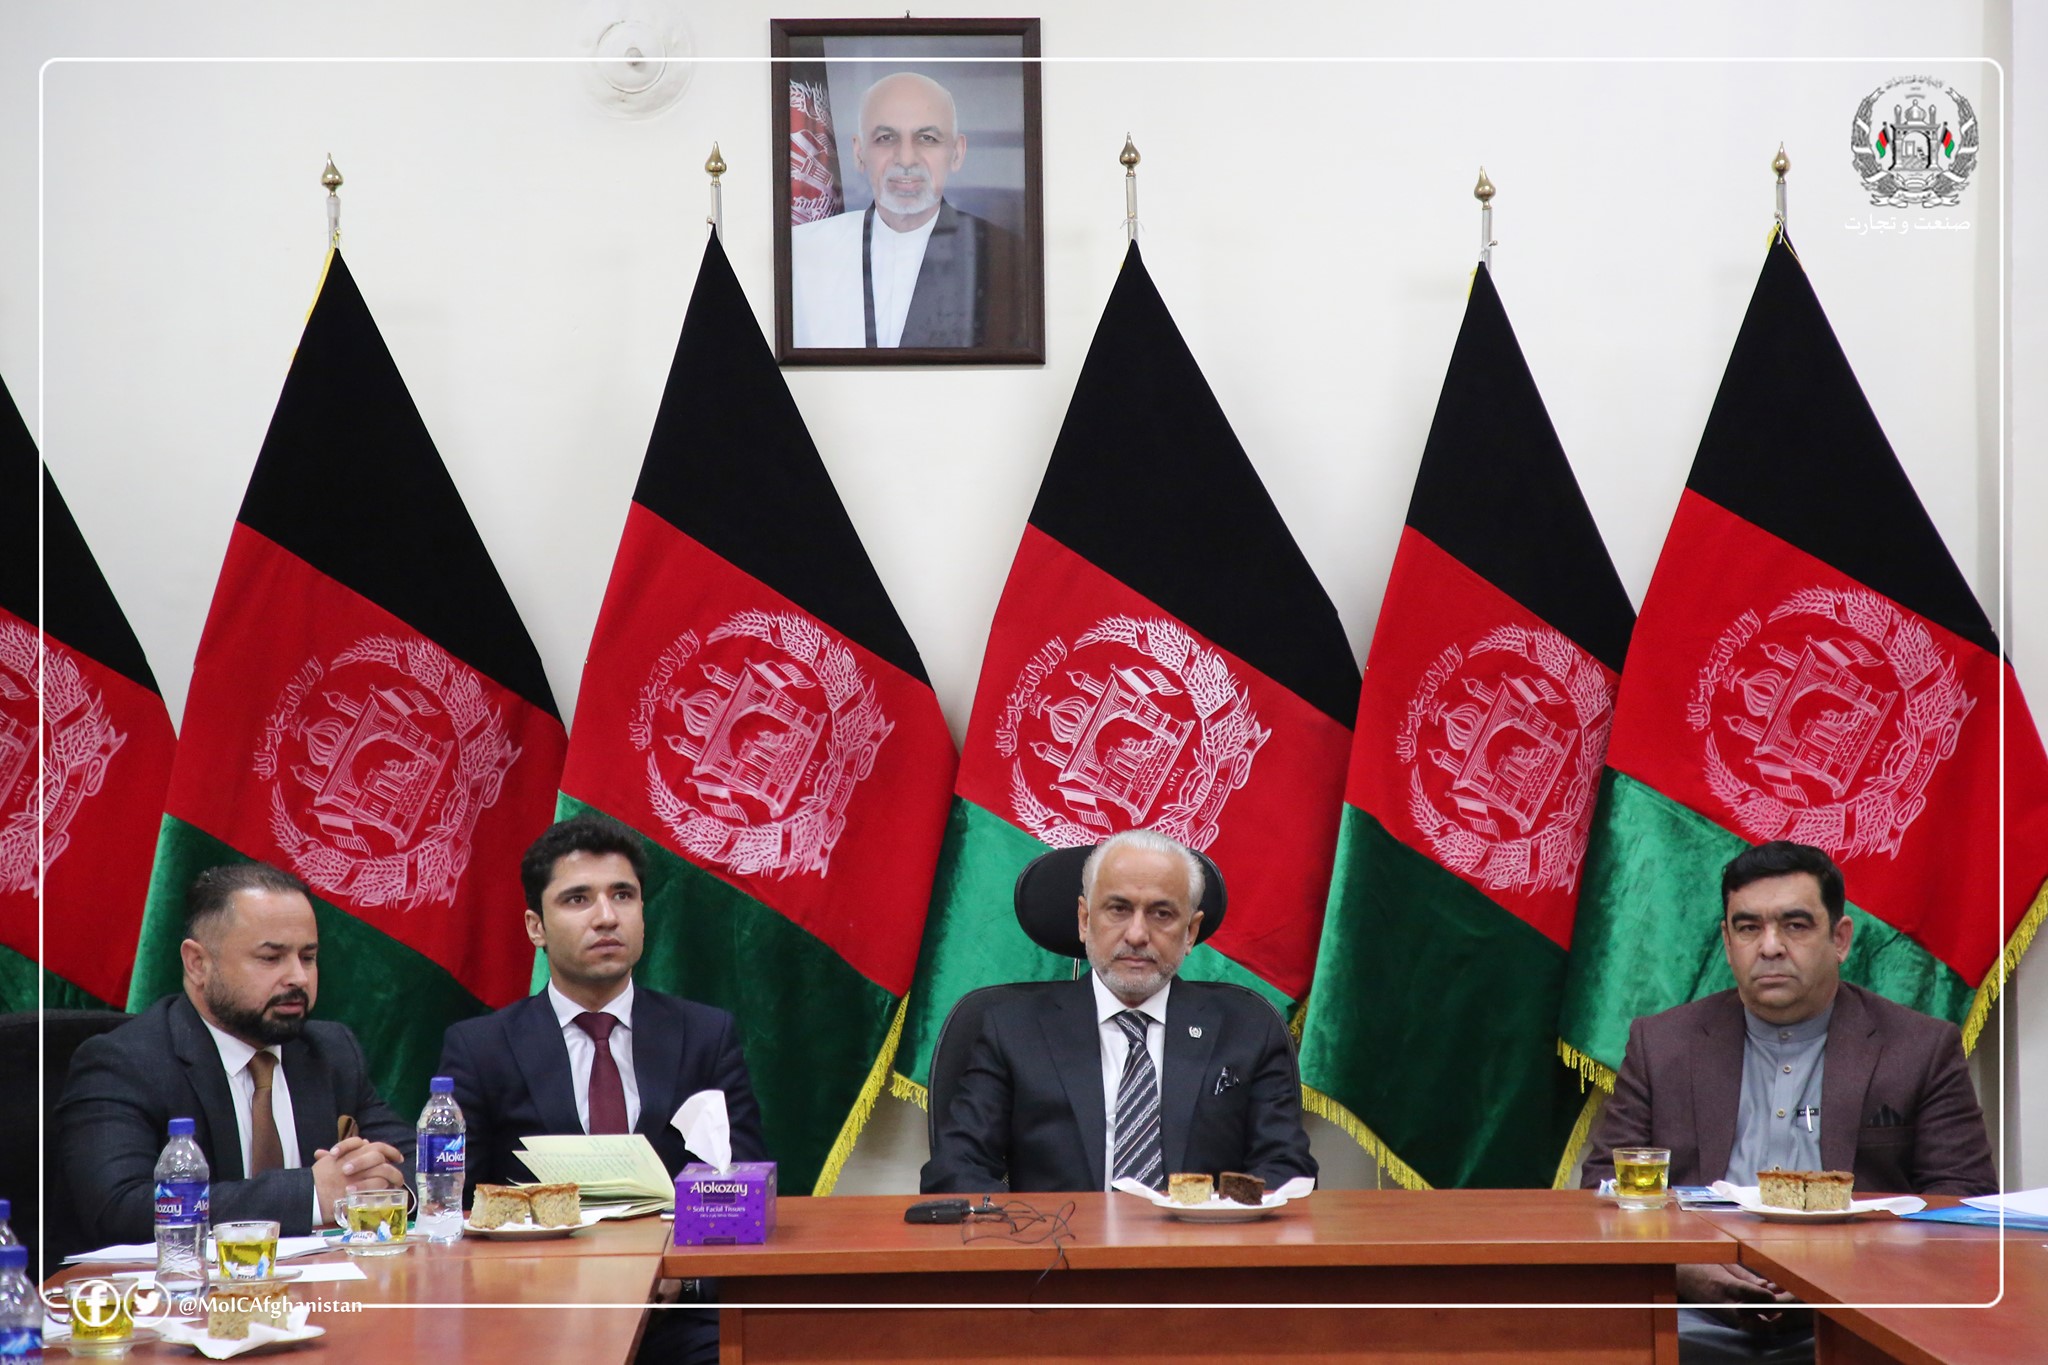 Meeting of Acting Minister of Industry and Commerce with Herat Industrialists